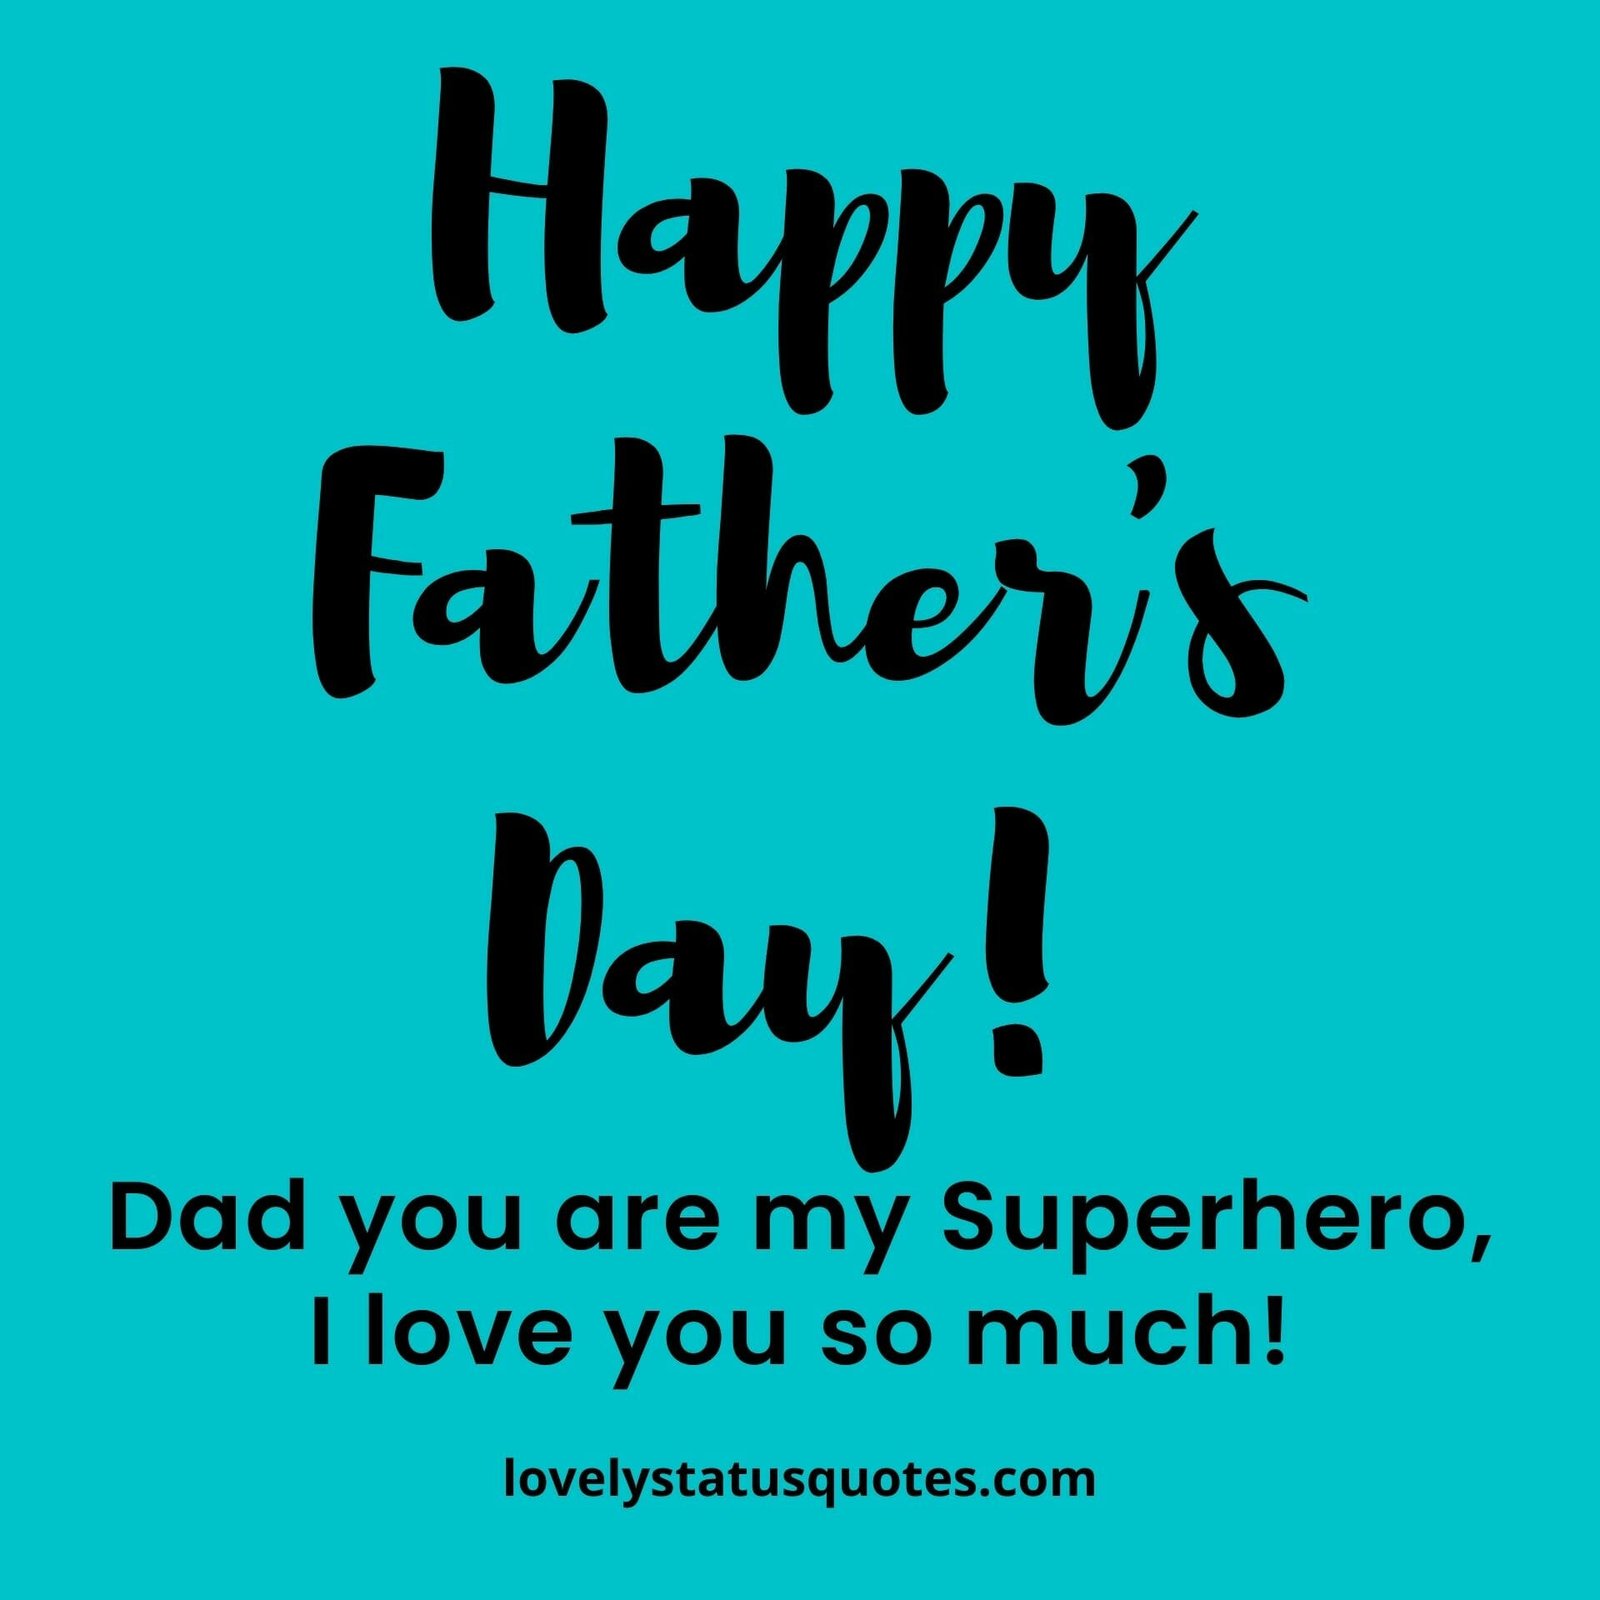 Happy Father's Day photos download